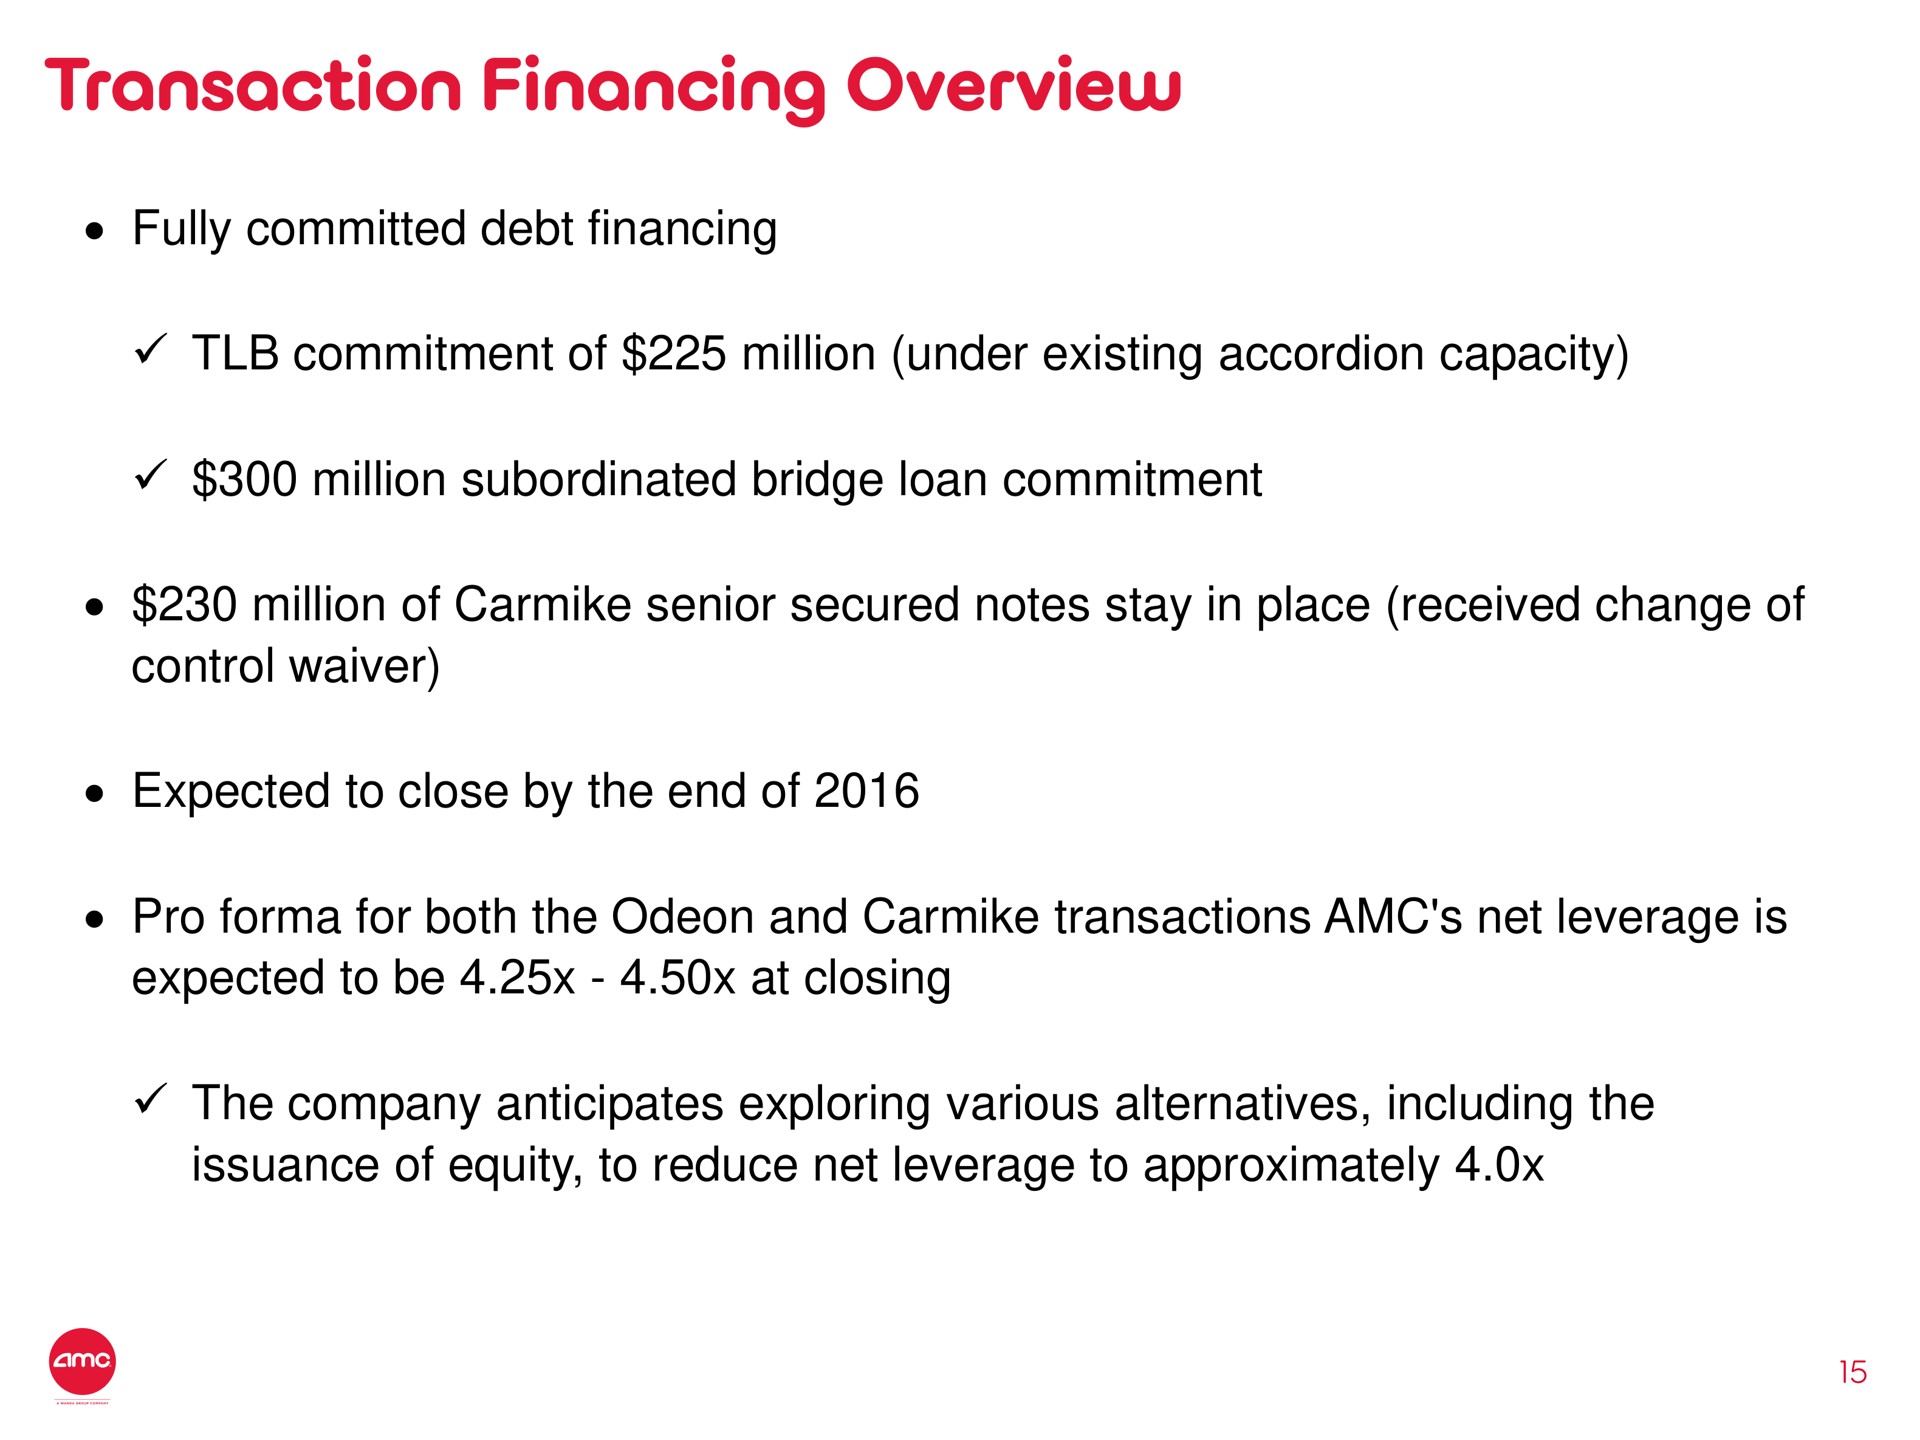 transaction financing overview fully committed debt financing commitment of million under existing accordion capacity million subordinated bridge loan commitment million of senior secured notes stay in place received change of control waiver expected to close by the end of pro for both the odeon and transactions net leverage is expected to be at closing the company anticipates exploring various alternatives including the issuance of equity to reduce net leverage to approximately | AMC